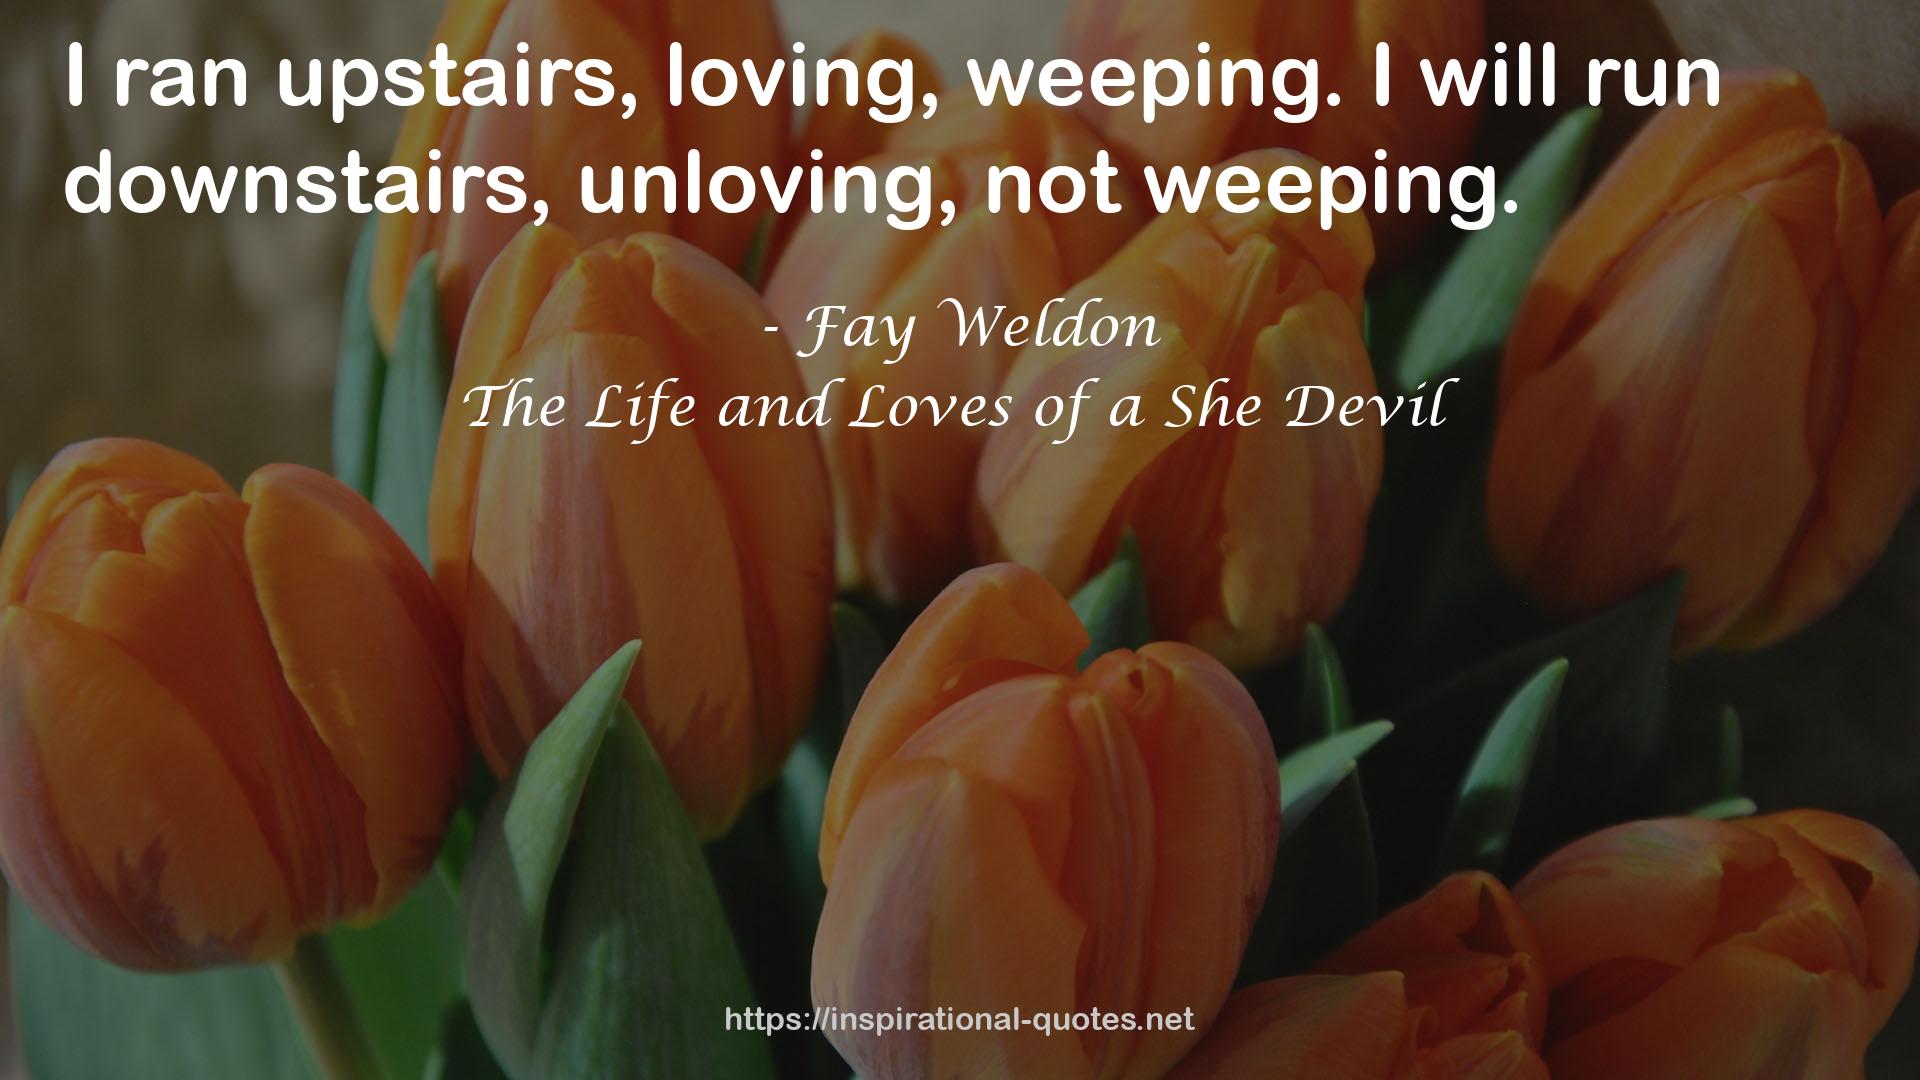 The Life and Loves of a She Devil QUOTES